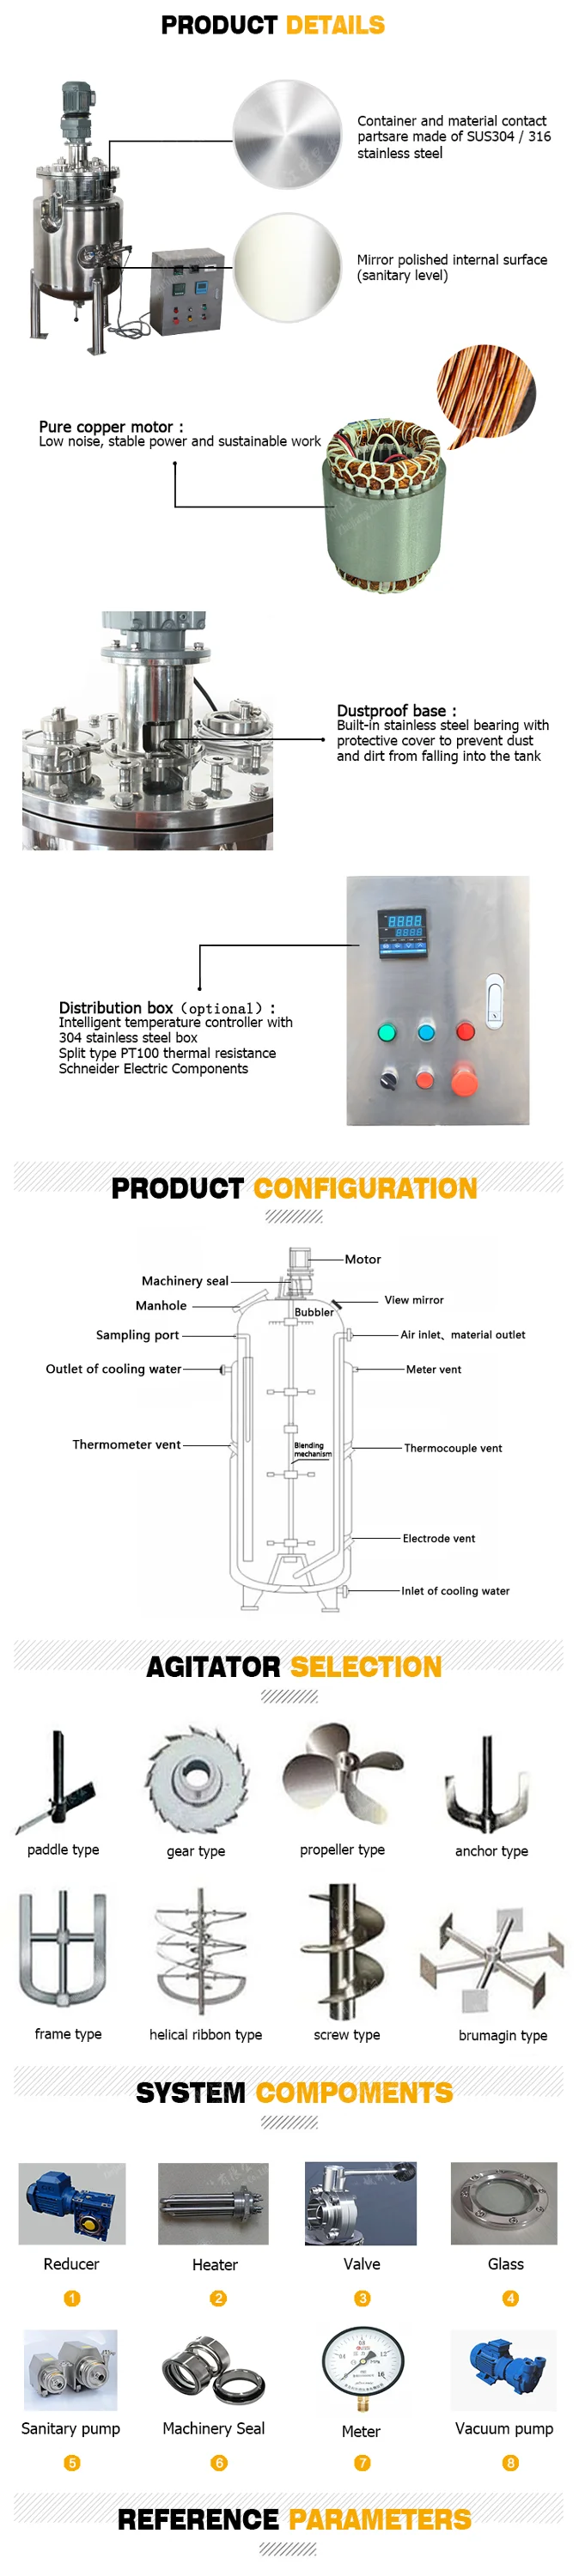 stainless steel 316L 50L~300L Fermentation tank with Precise temperature control for cultivate lab use microorganism